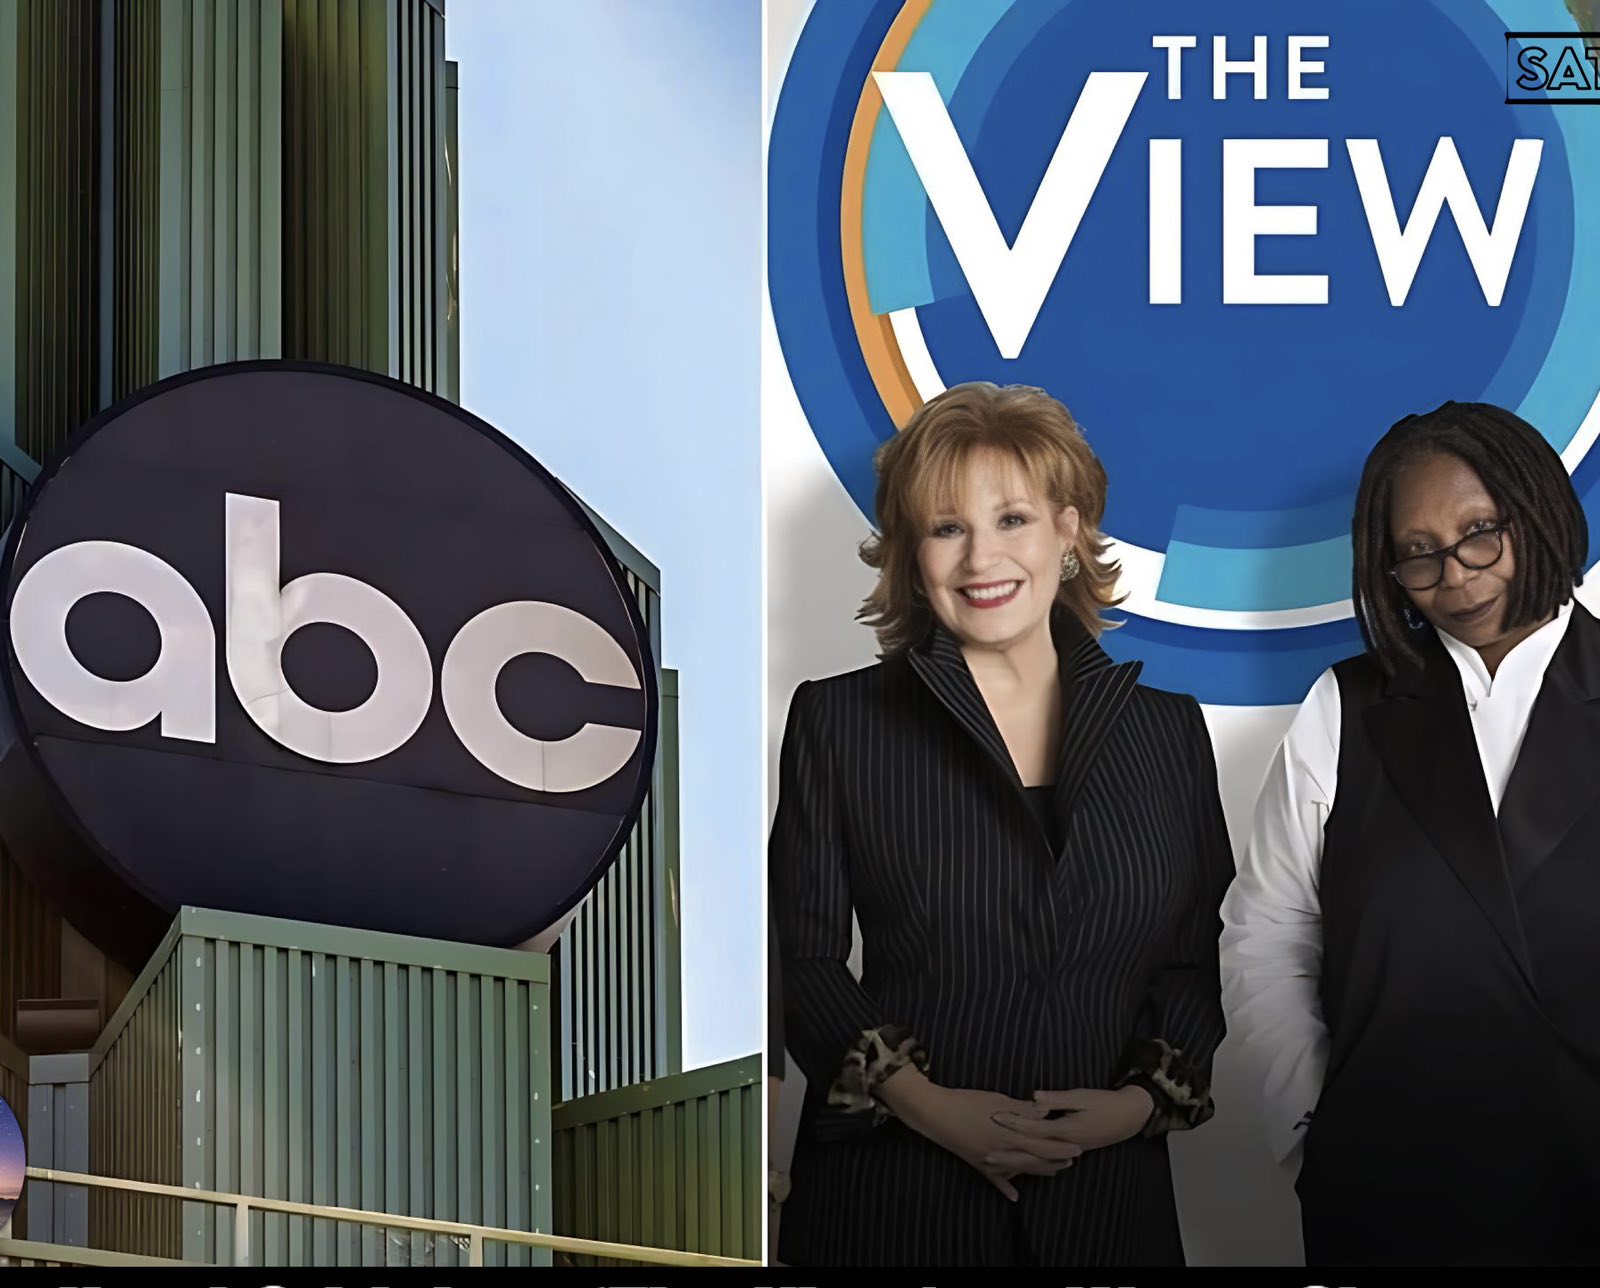 ABC’s Head Criticizes ‘The View’ as Worst Show on TV, Suggests Possible Cancellation